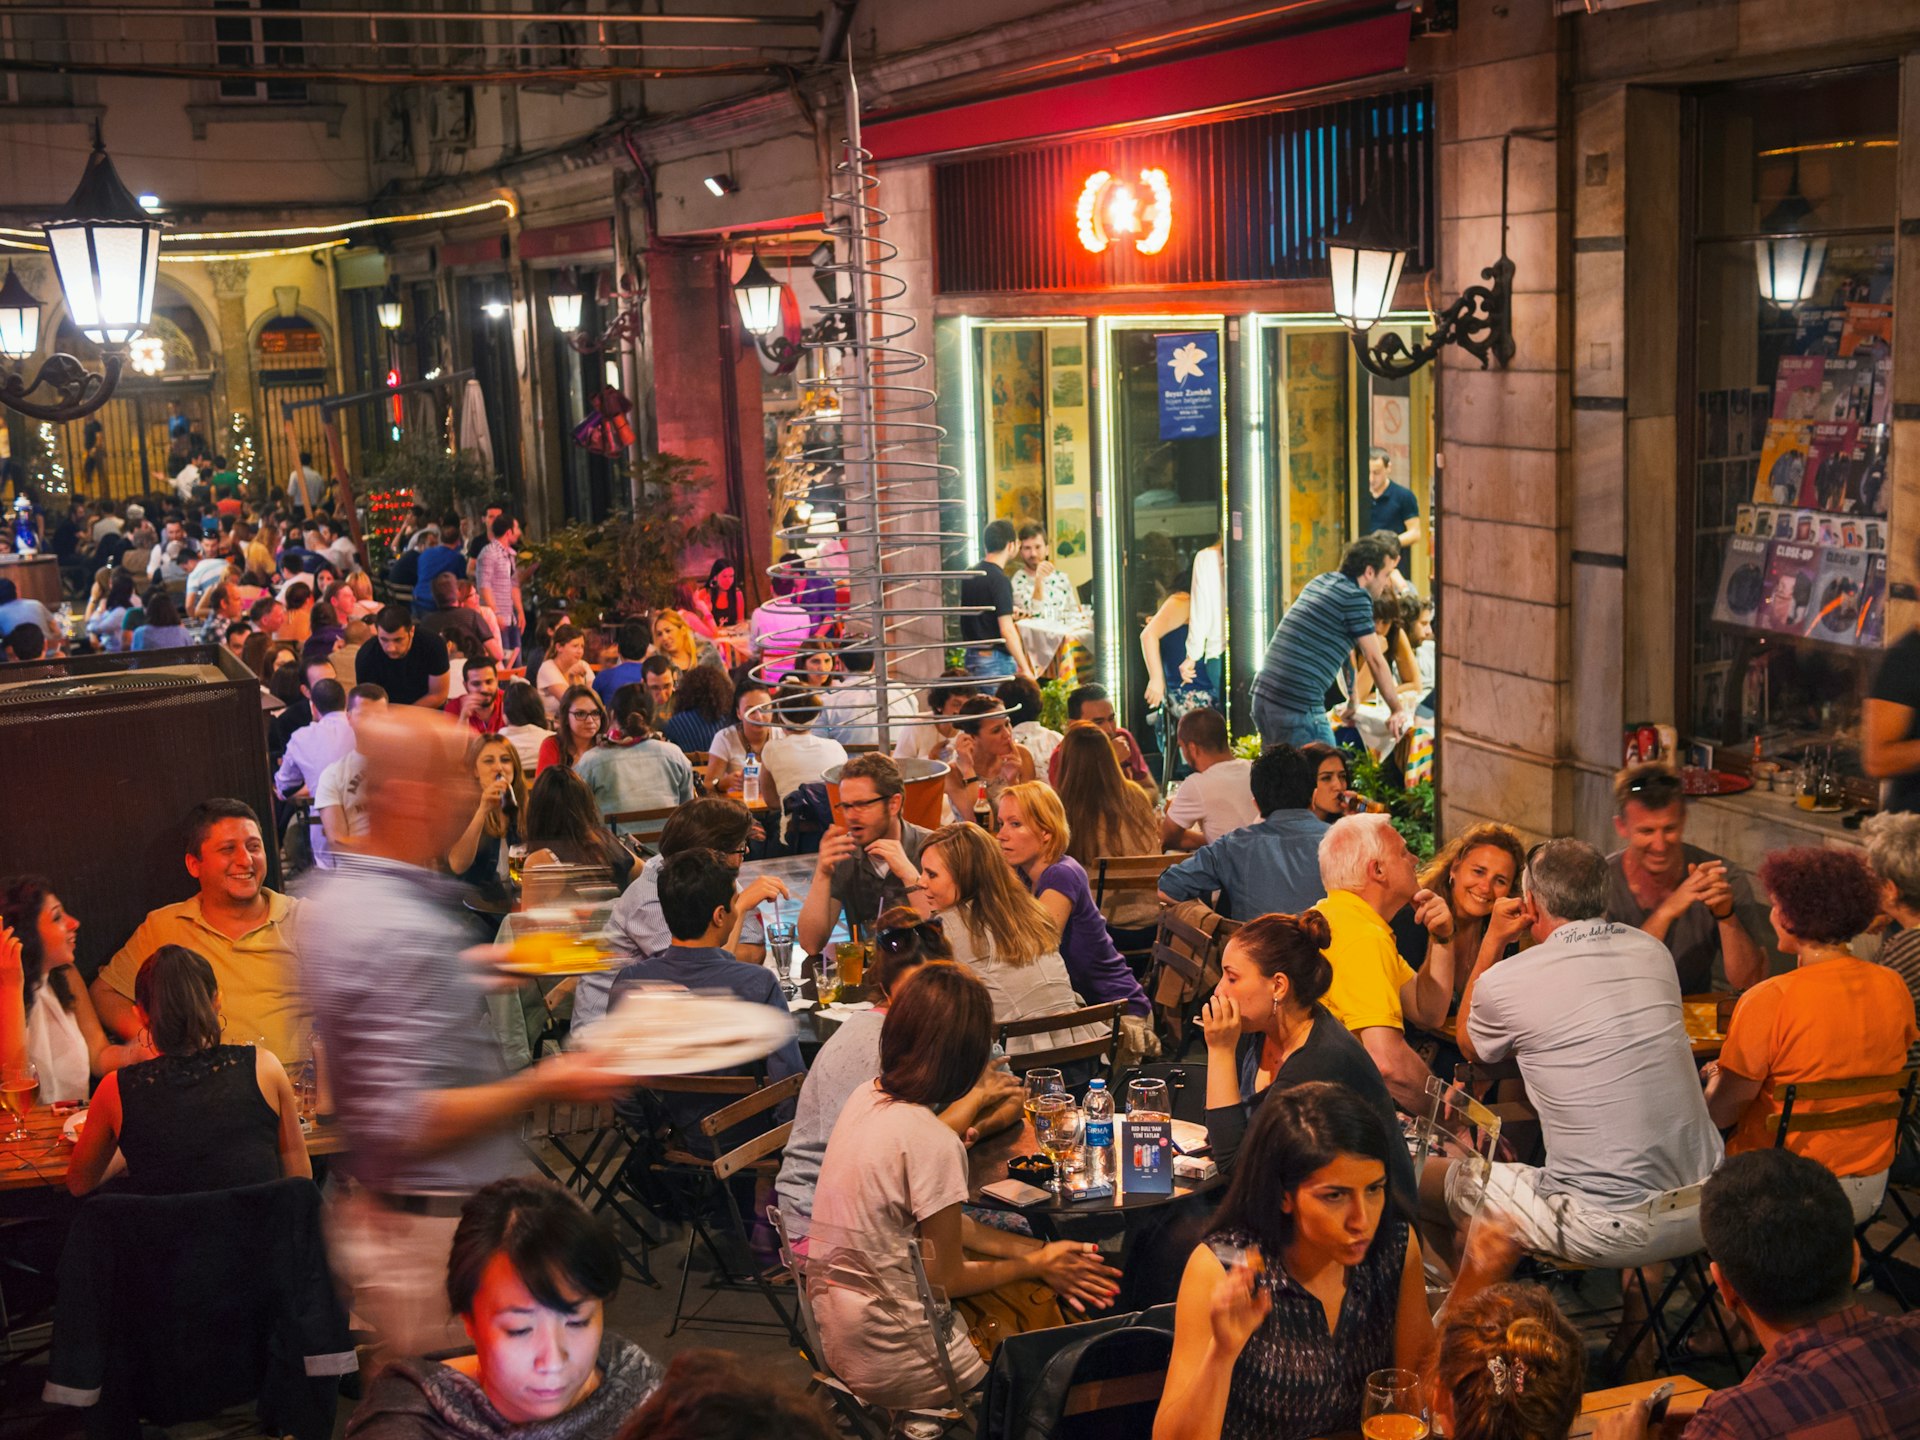 Many people are packed into the outside seating area of a bar in the Beyoğlu district of Istanbul